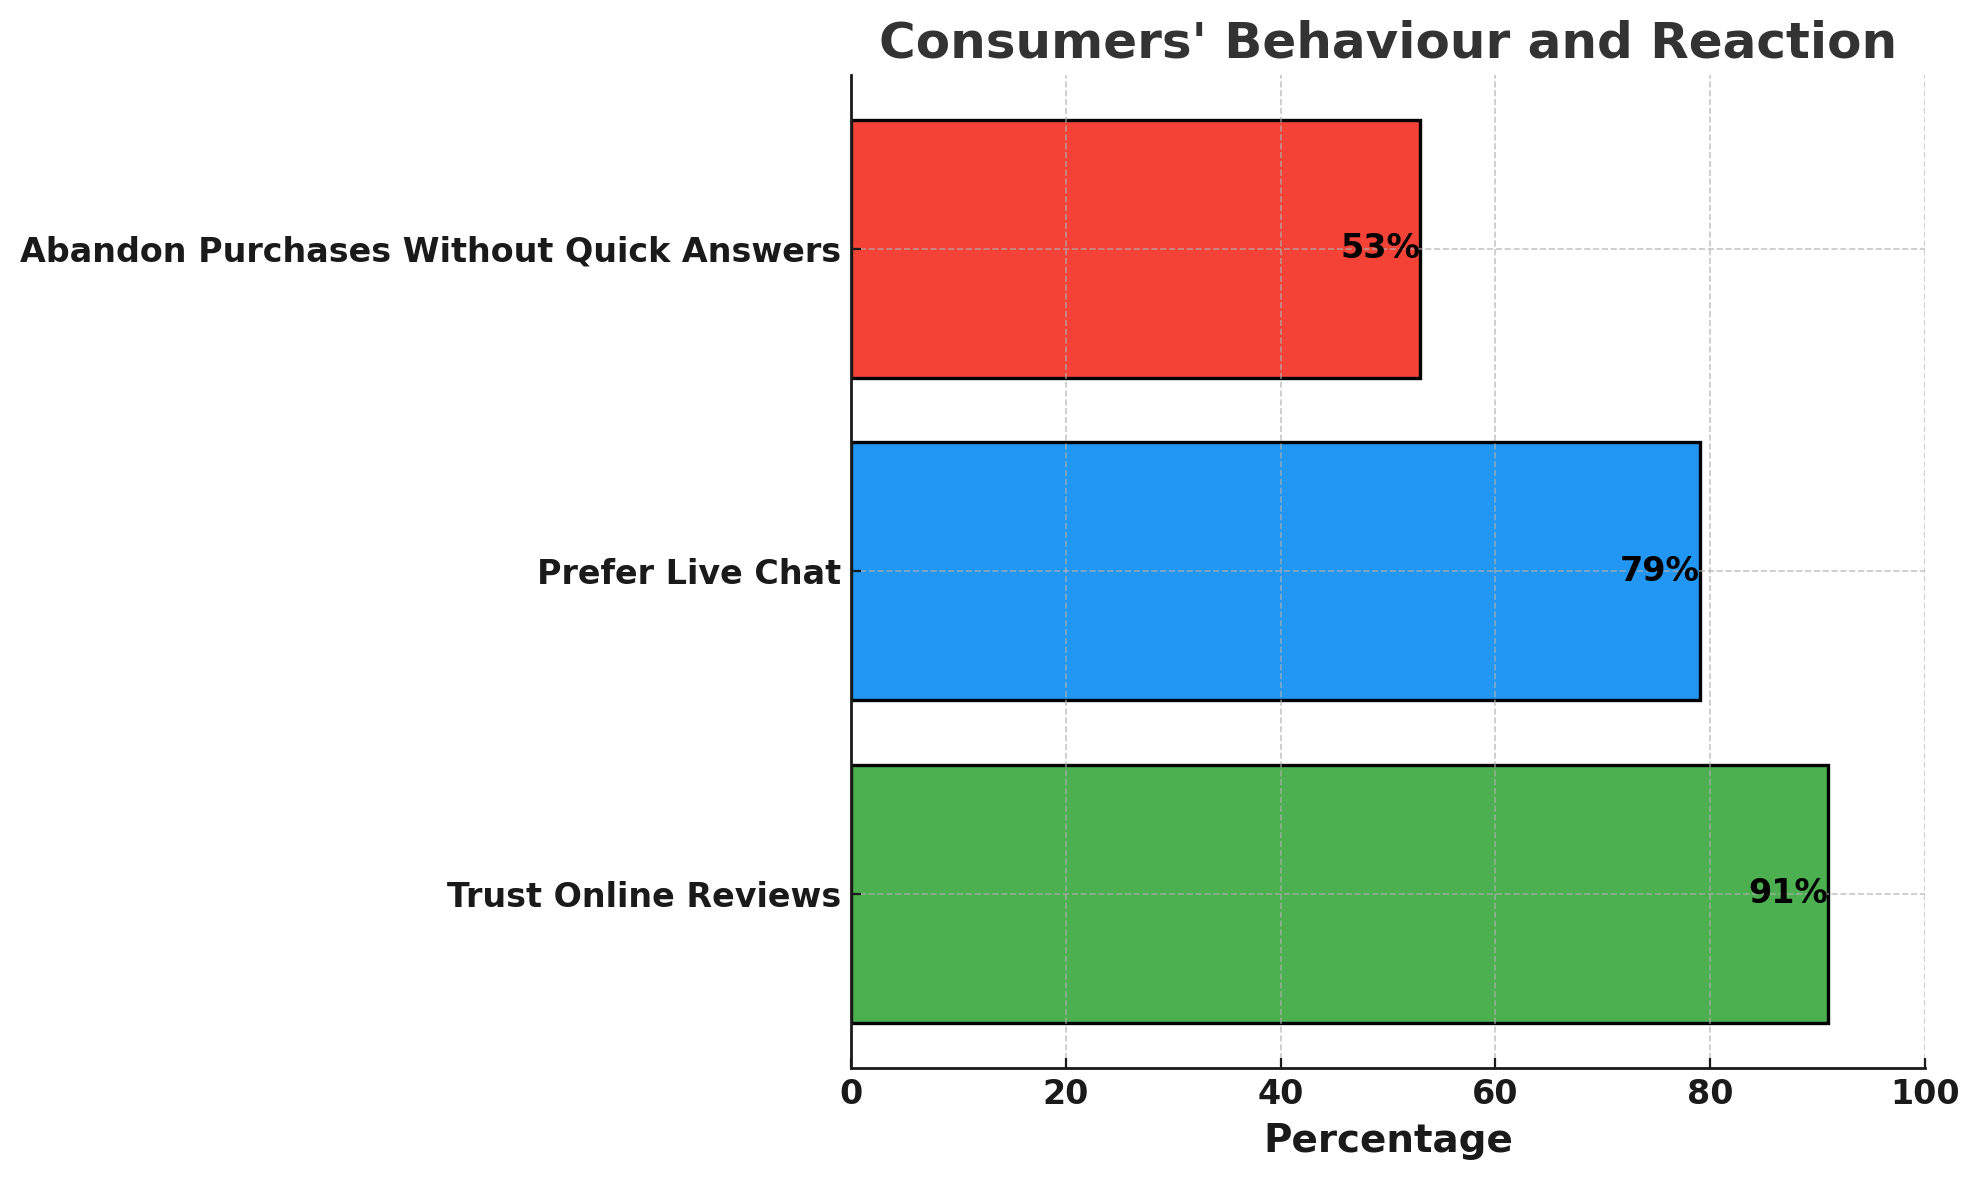 Consumers' Behaviour and Reaction